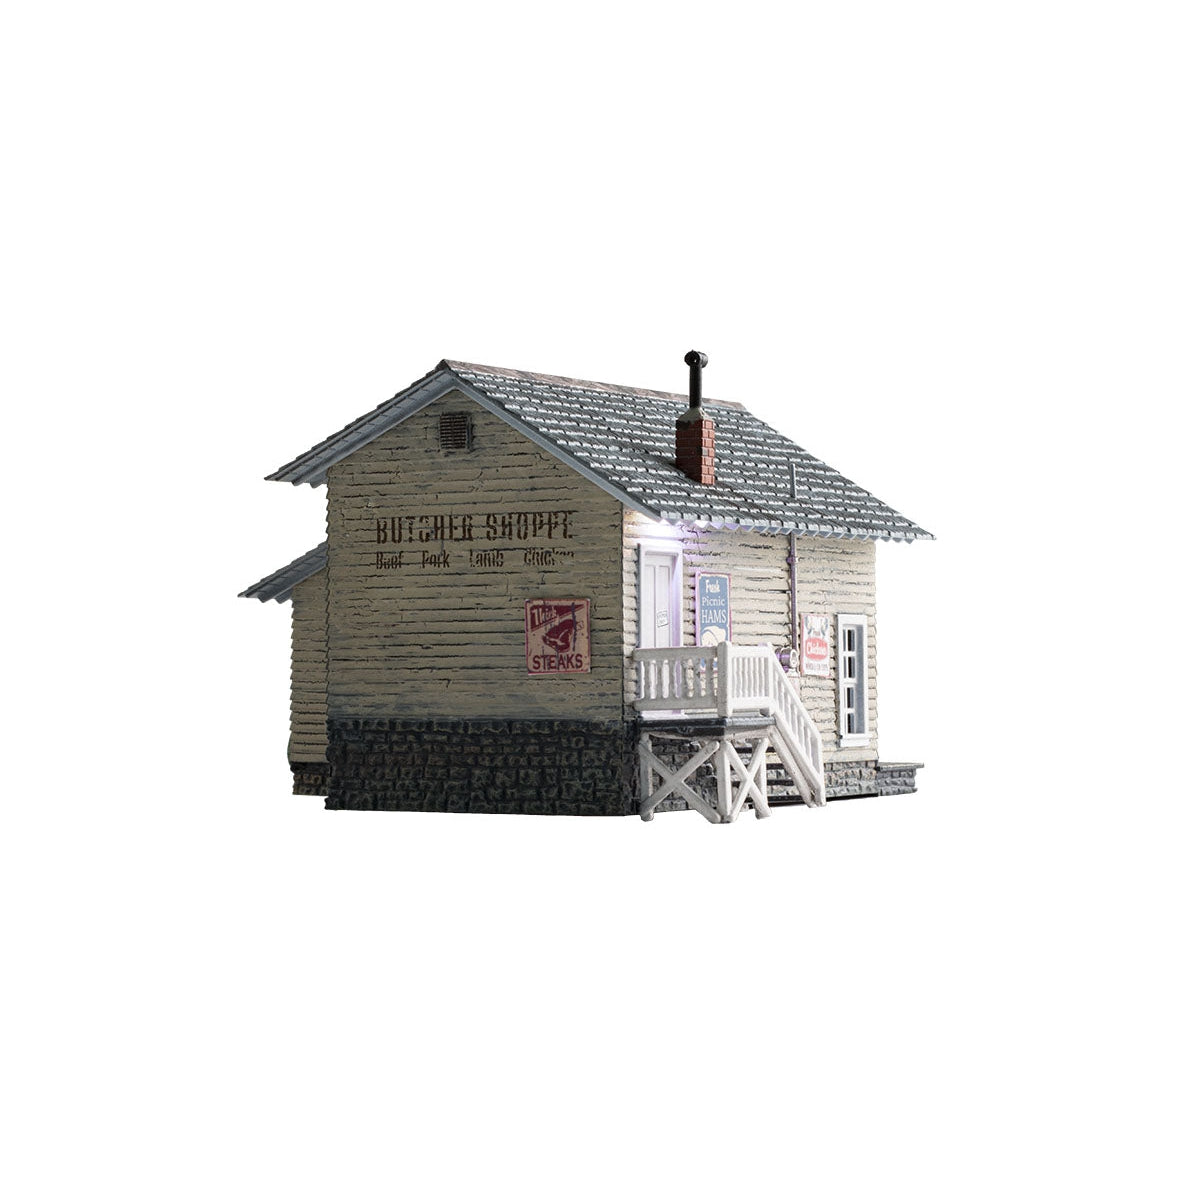 Woodland Scenics 4958 Carver's Butcher Shoppe - N Scale